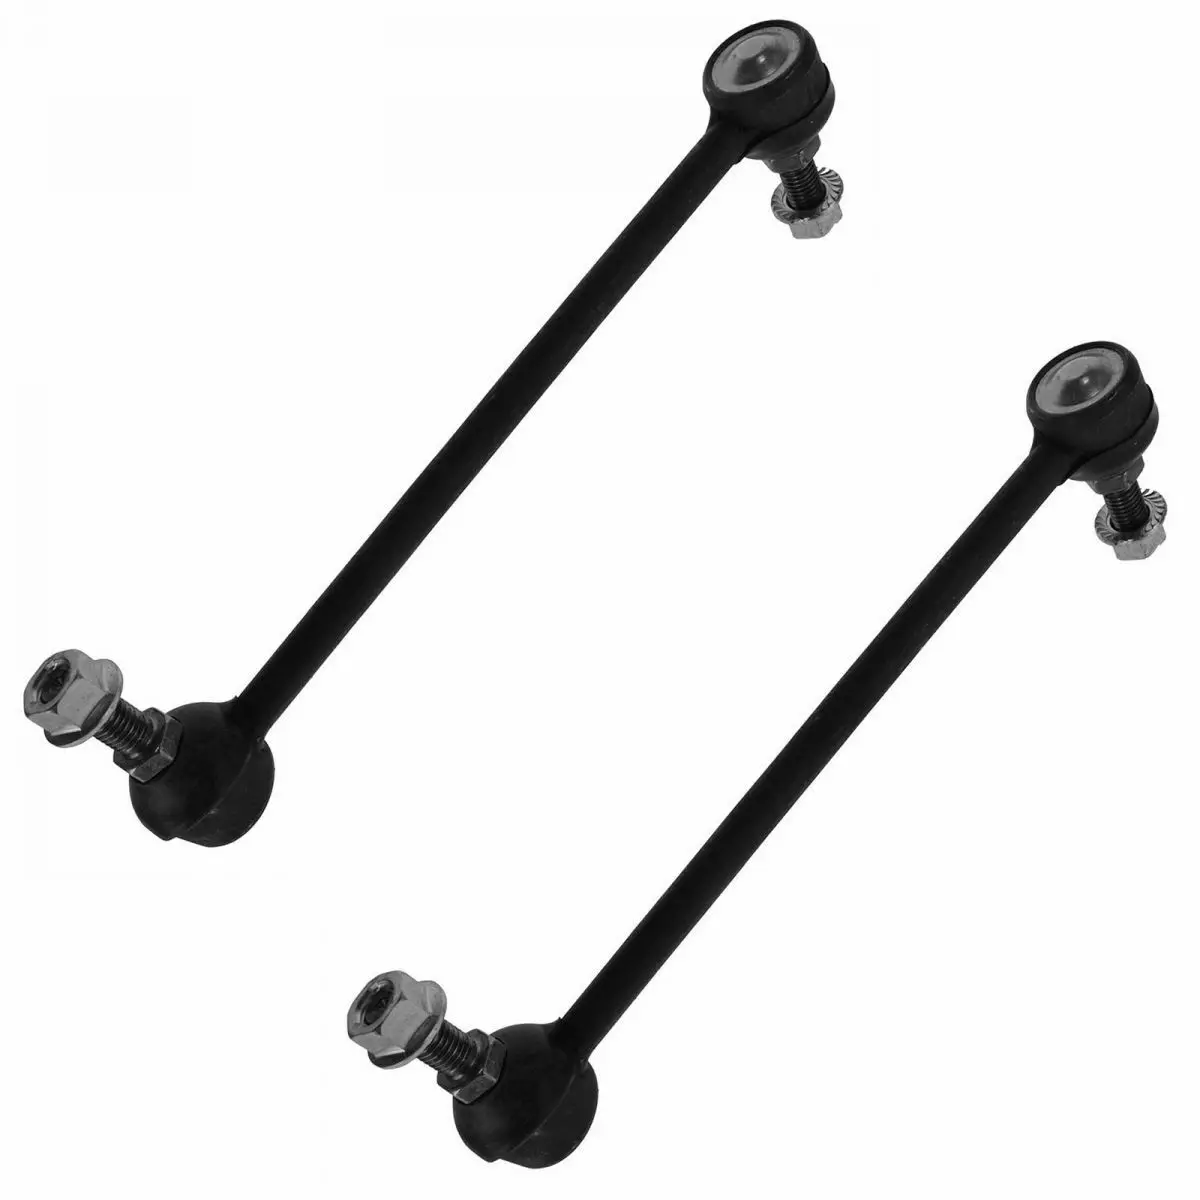 

SiJay Pair of Front Axle Sway Bar End Stabilizer Link For Toyota Camry Avalon Lexus ES300 ES330 RX330 RX350 RX400h 48820-06040